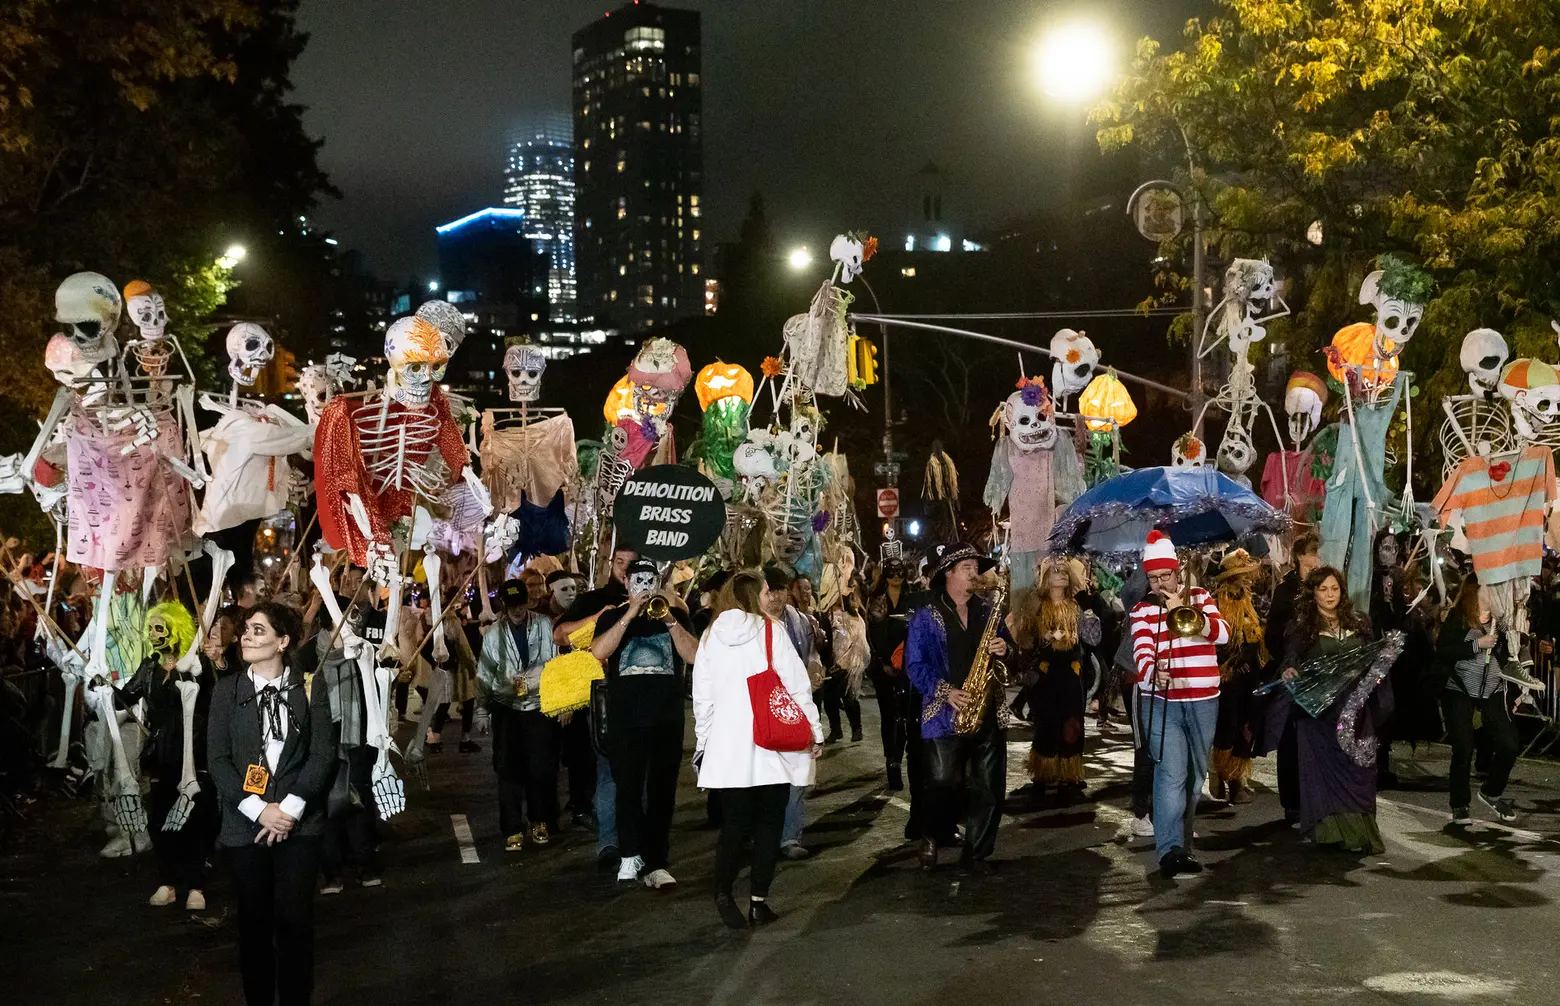 Village Halloween Parade cancelled for only the second time in 47 years